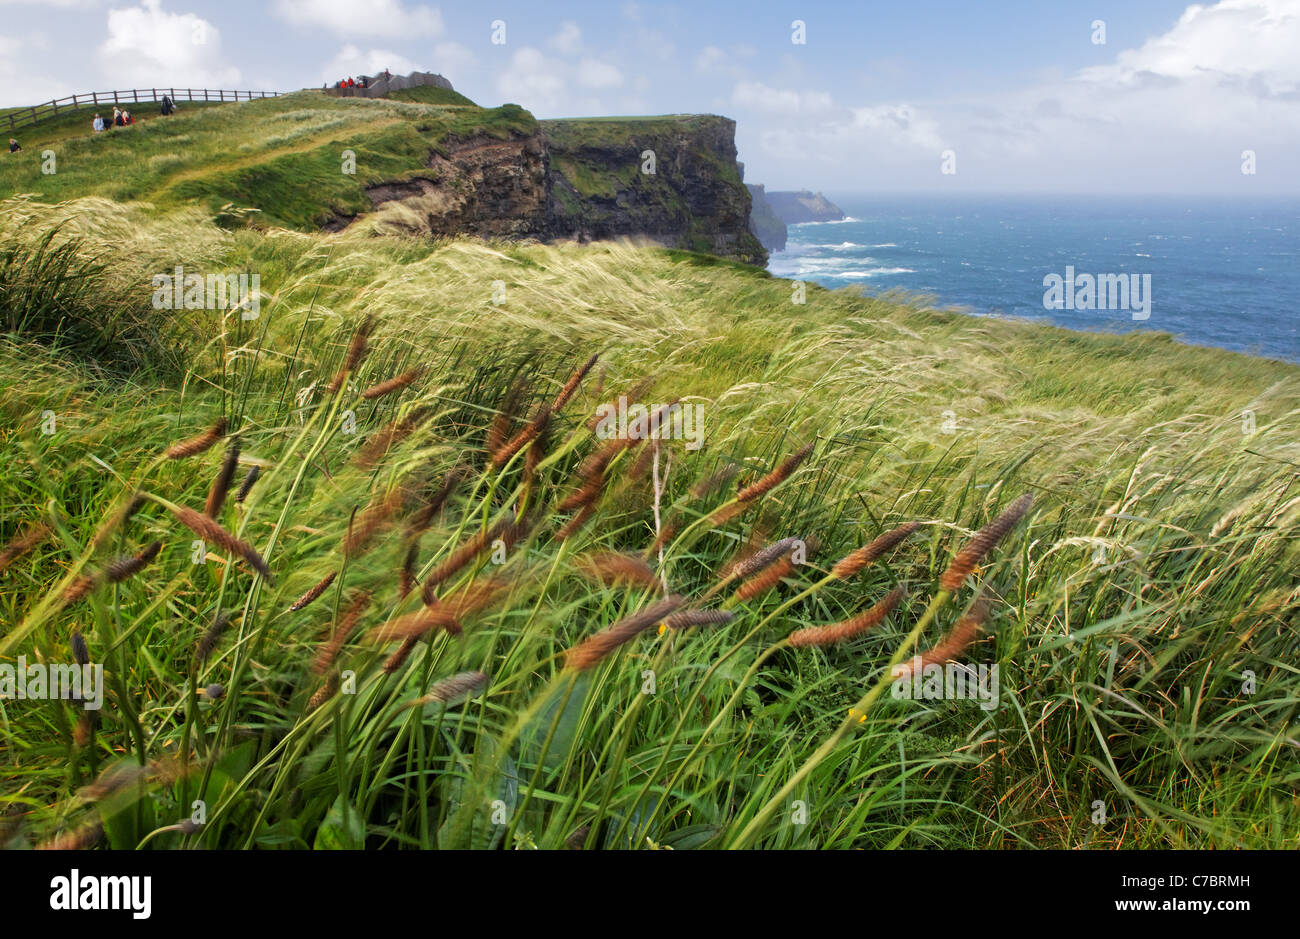 Grasses blowing in the wind atop the Cliffs of Mohr, Hag's Head, The Burren, County Clare, Republic of Ireland Stock Photo